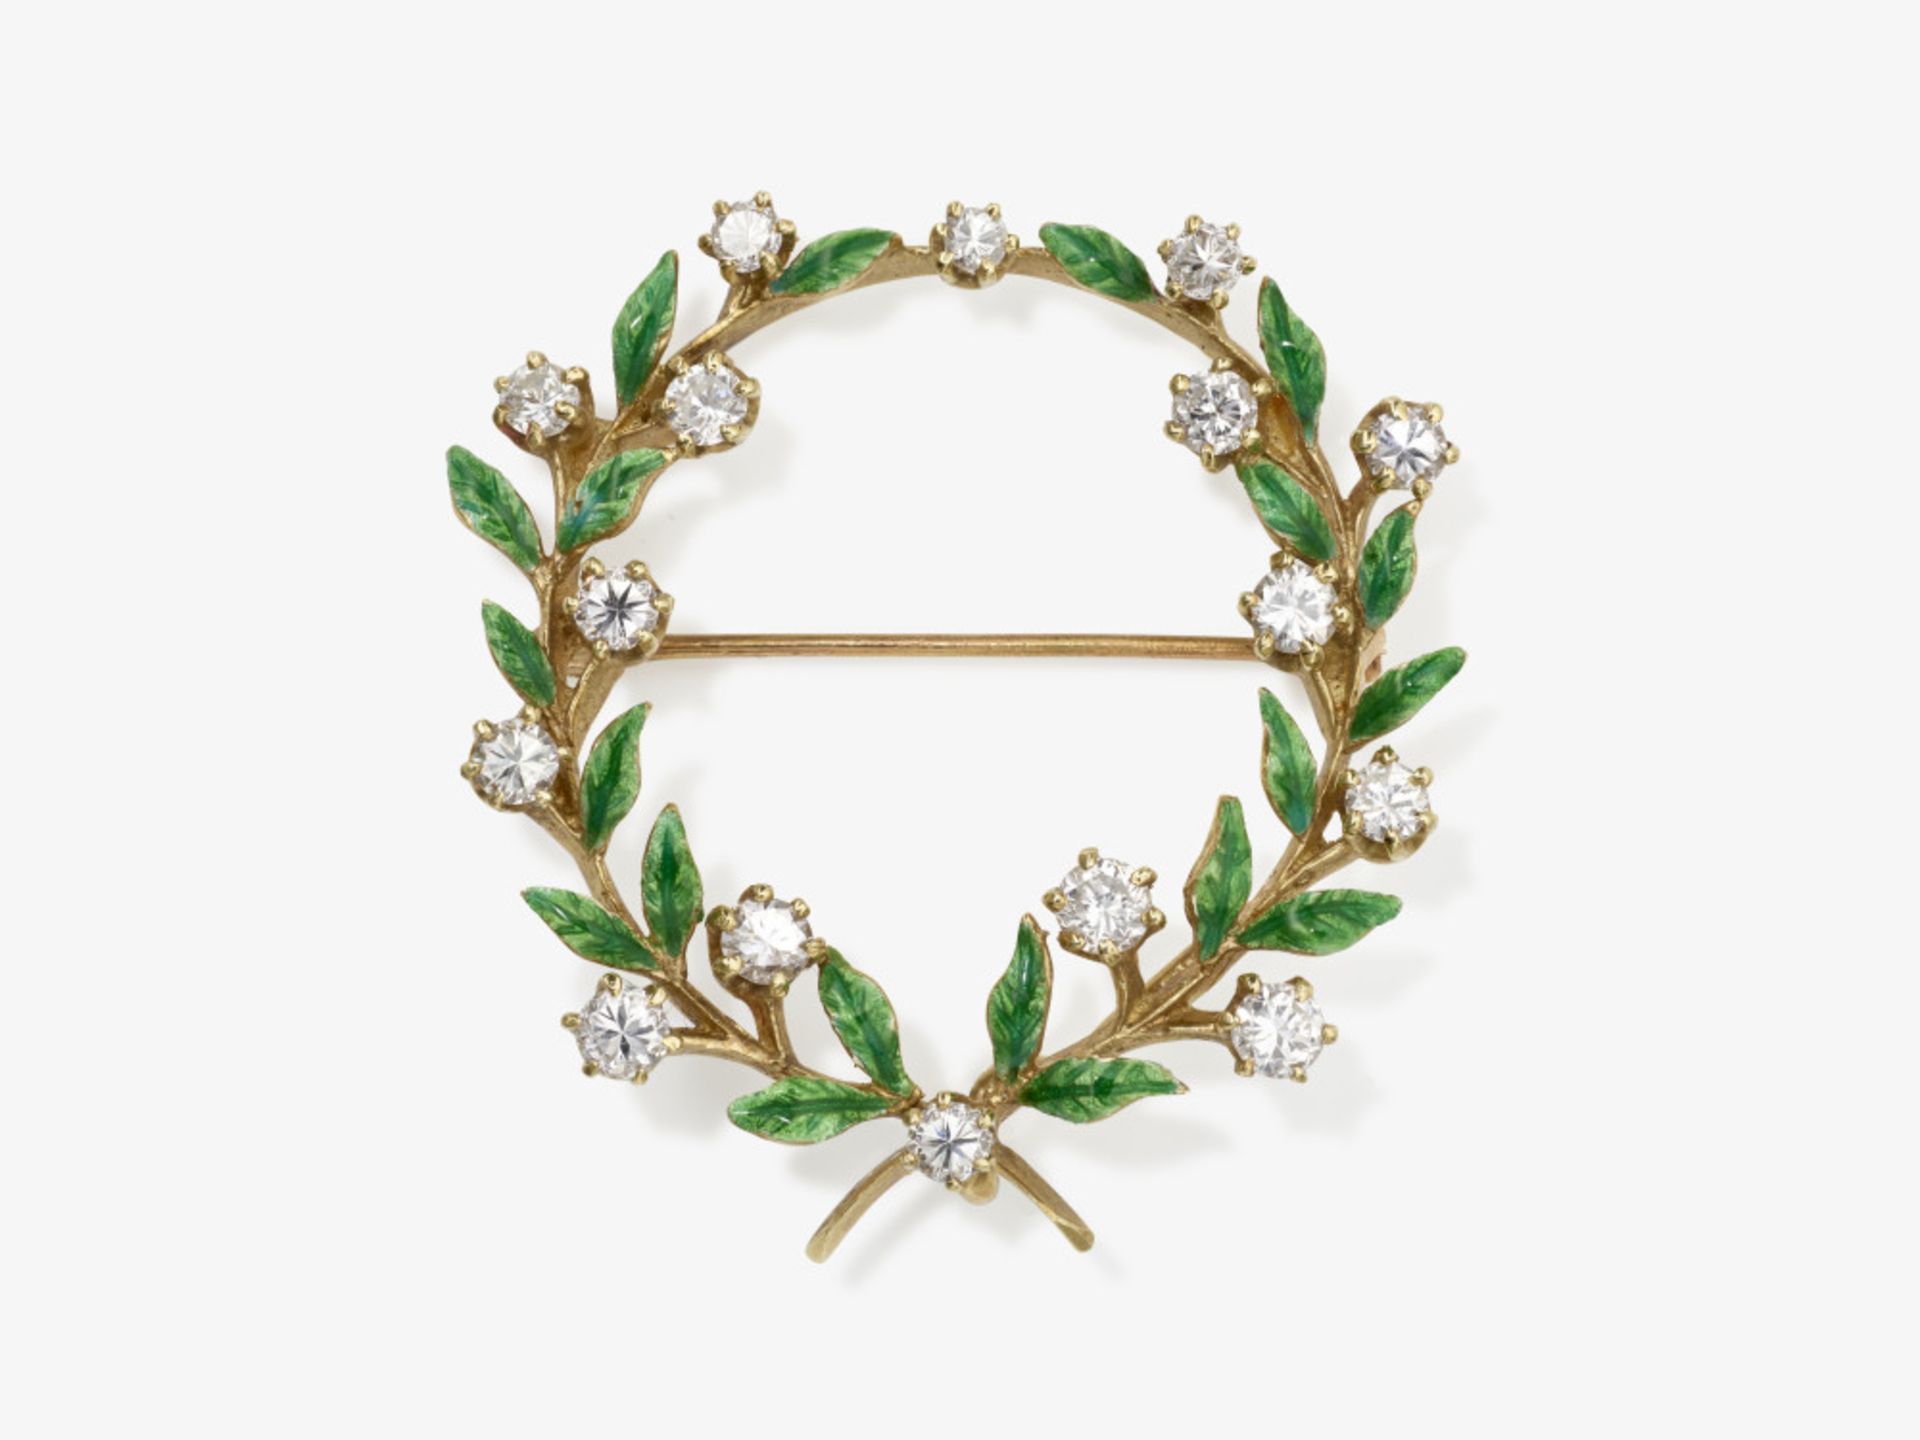 A historical flowering branch wreath brooch decorated with brilliant-cut diamonds and enamel - Image 2 of 2